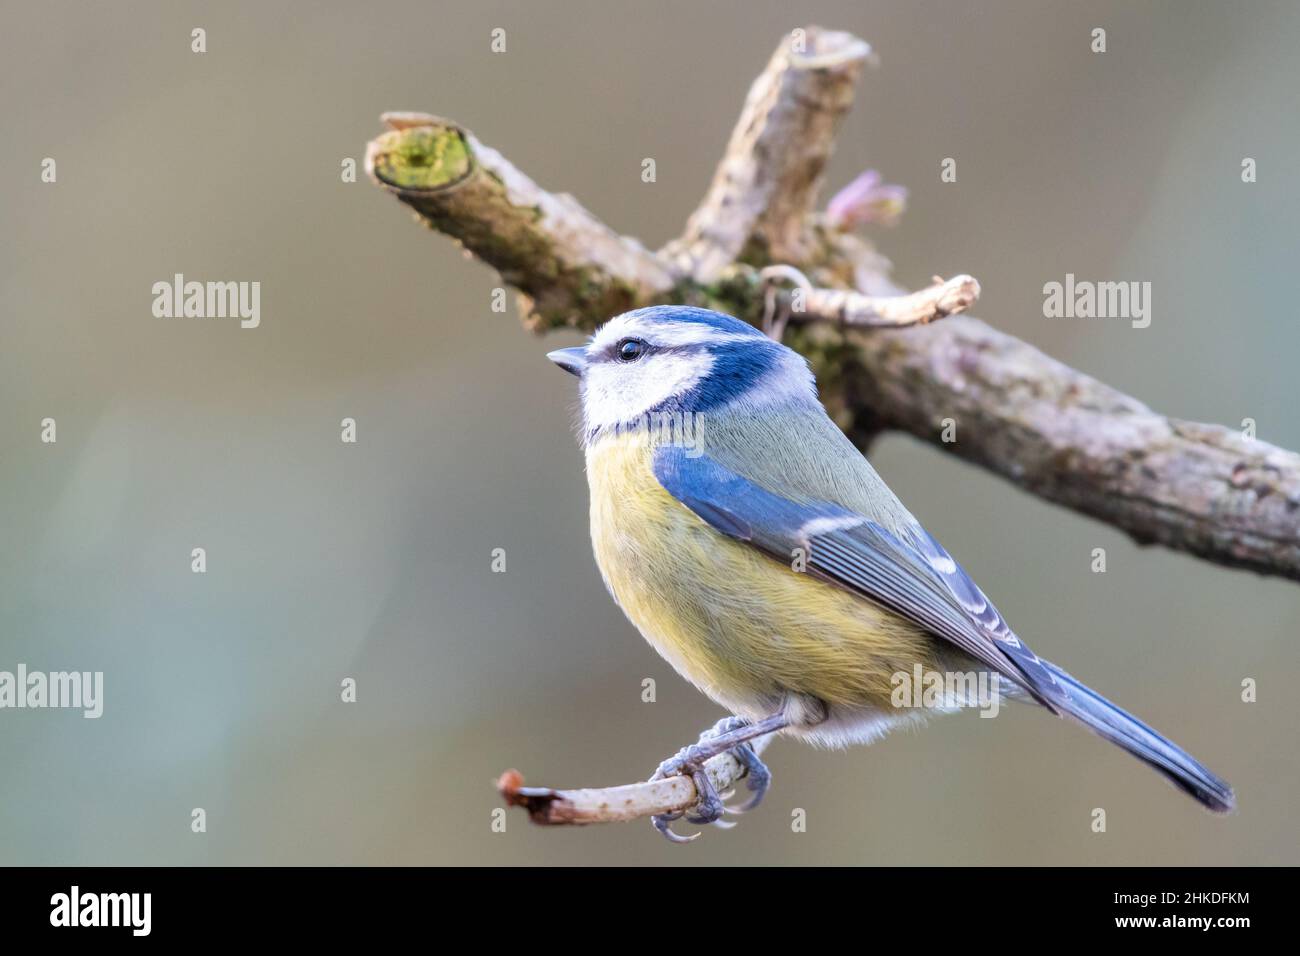 Blue tit perched on a branch, England, UK Stock Photo